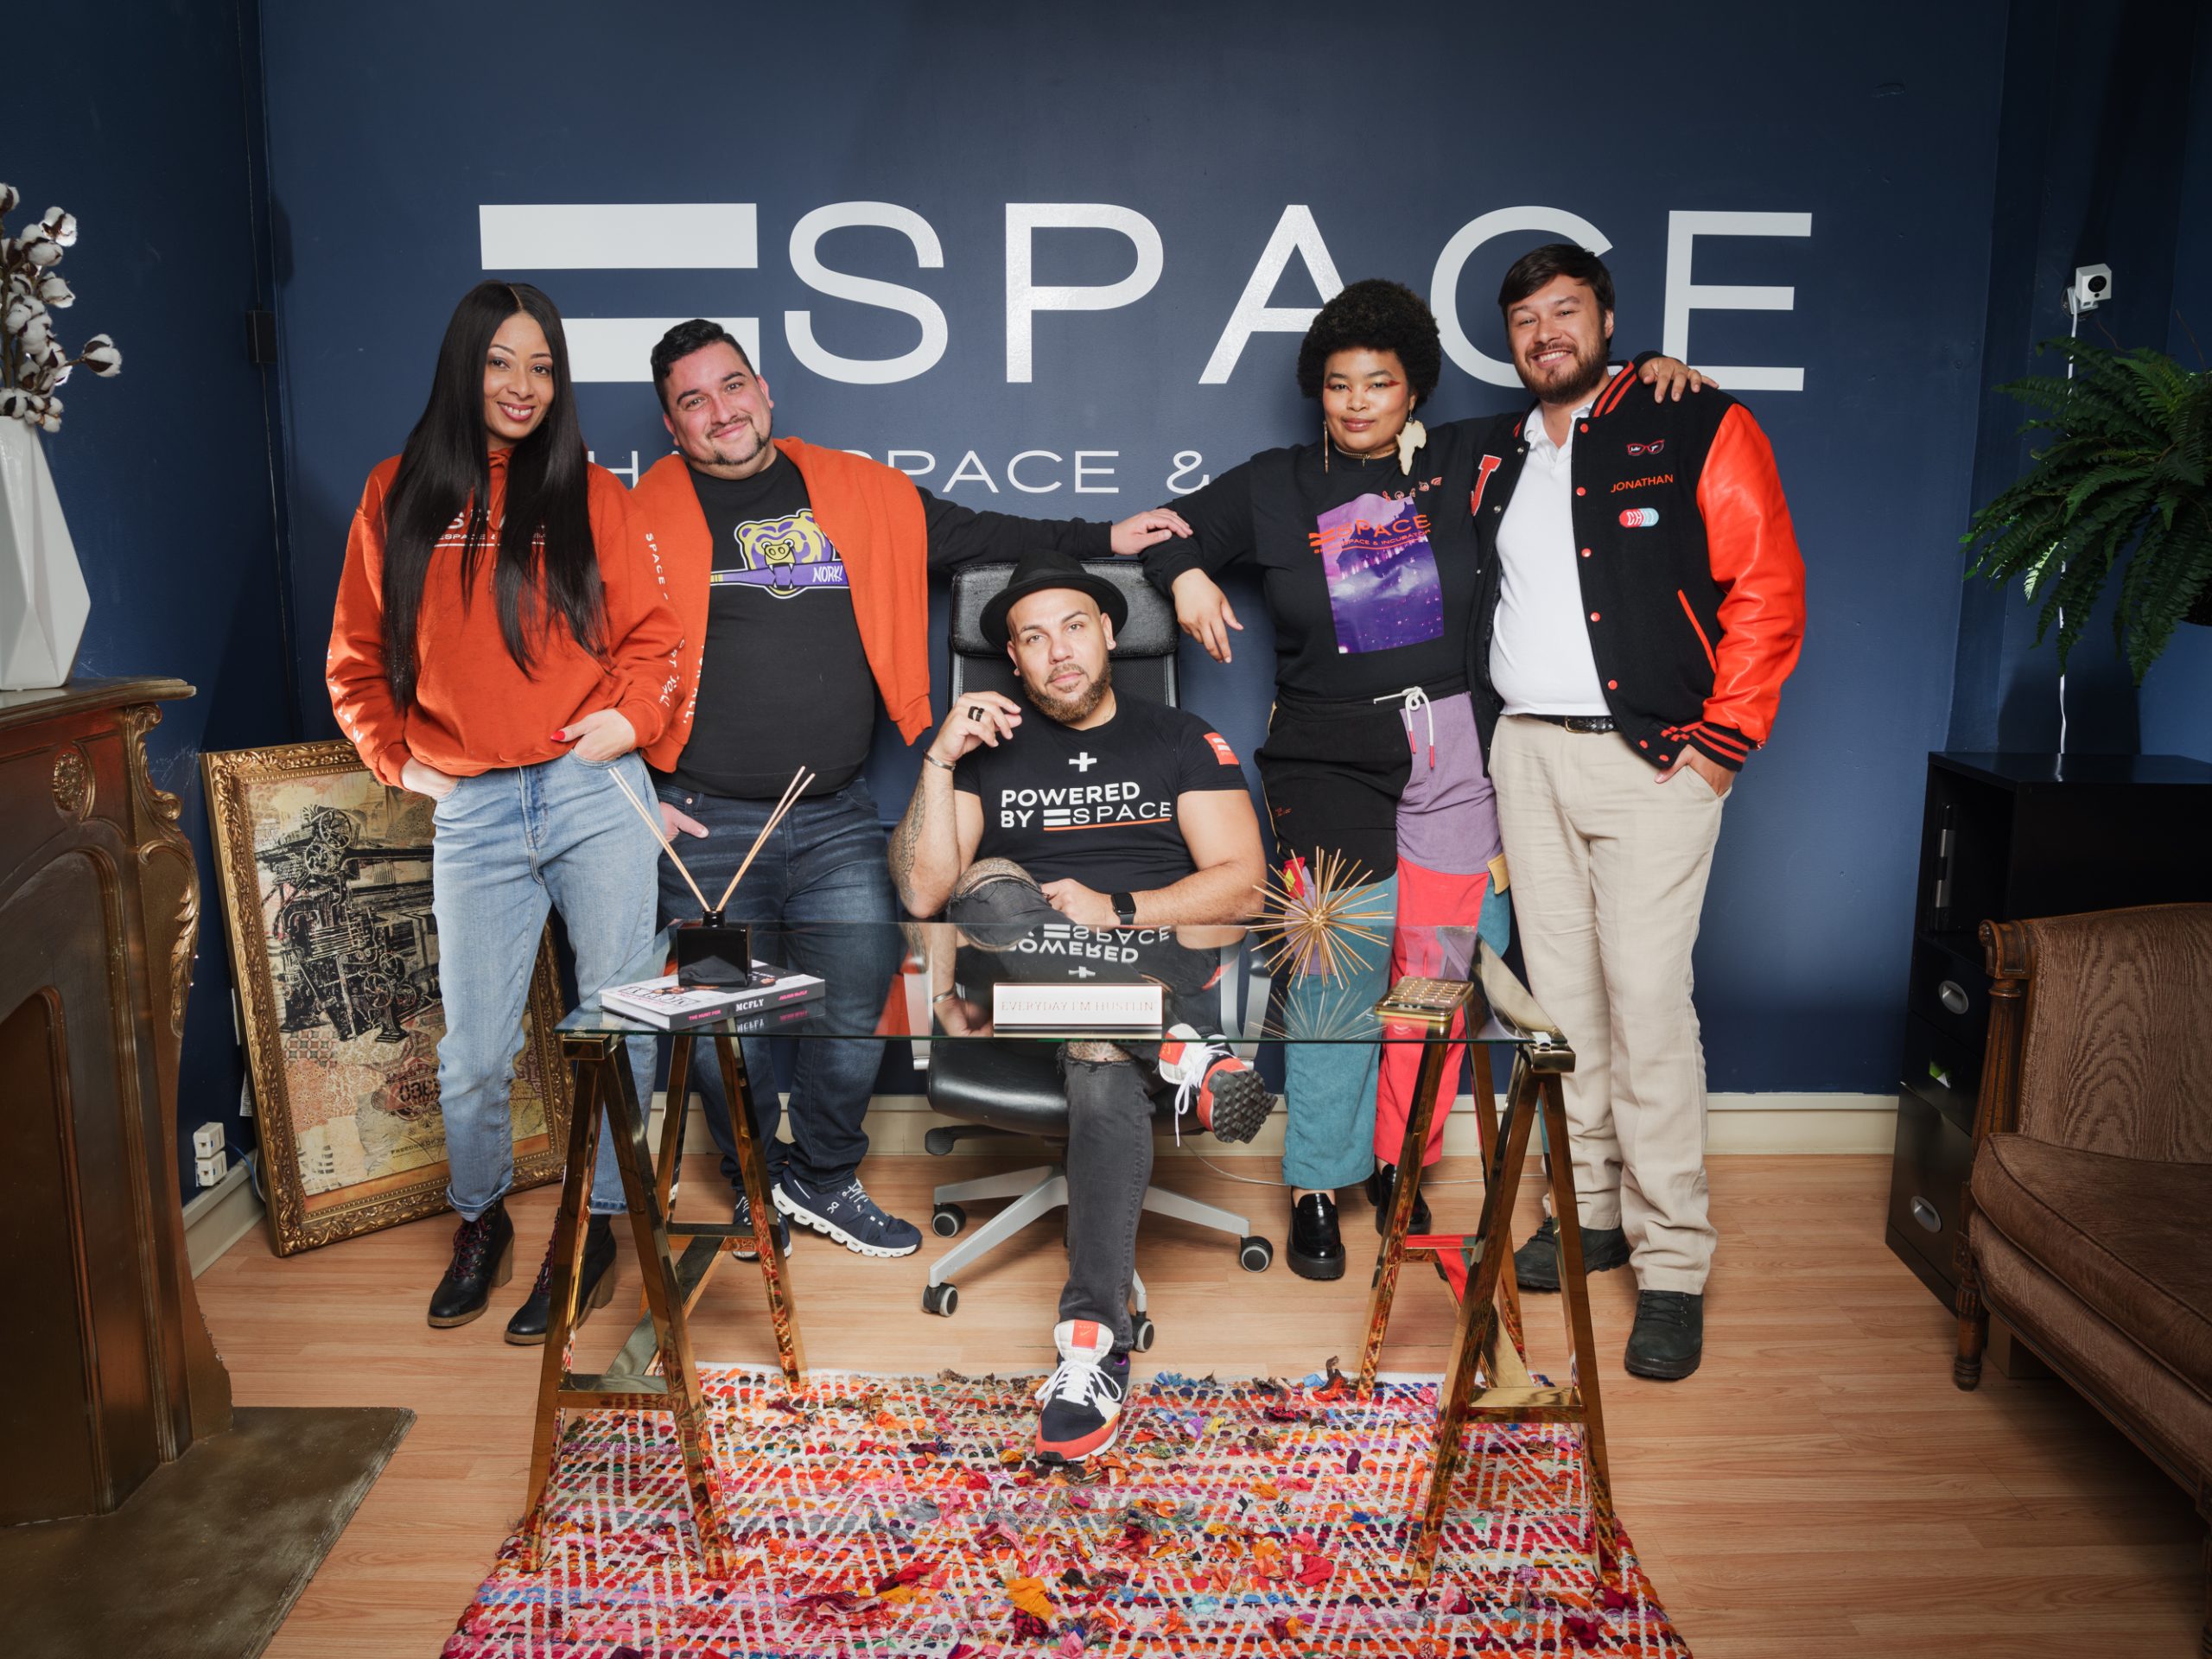 Empowering Innovation: Equal Space Secures $2 Million Grant for Cutting-Edge Workspace Development!